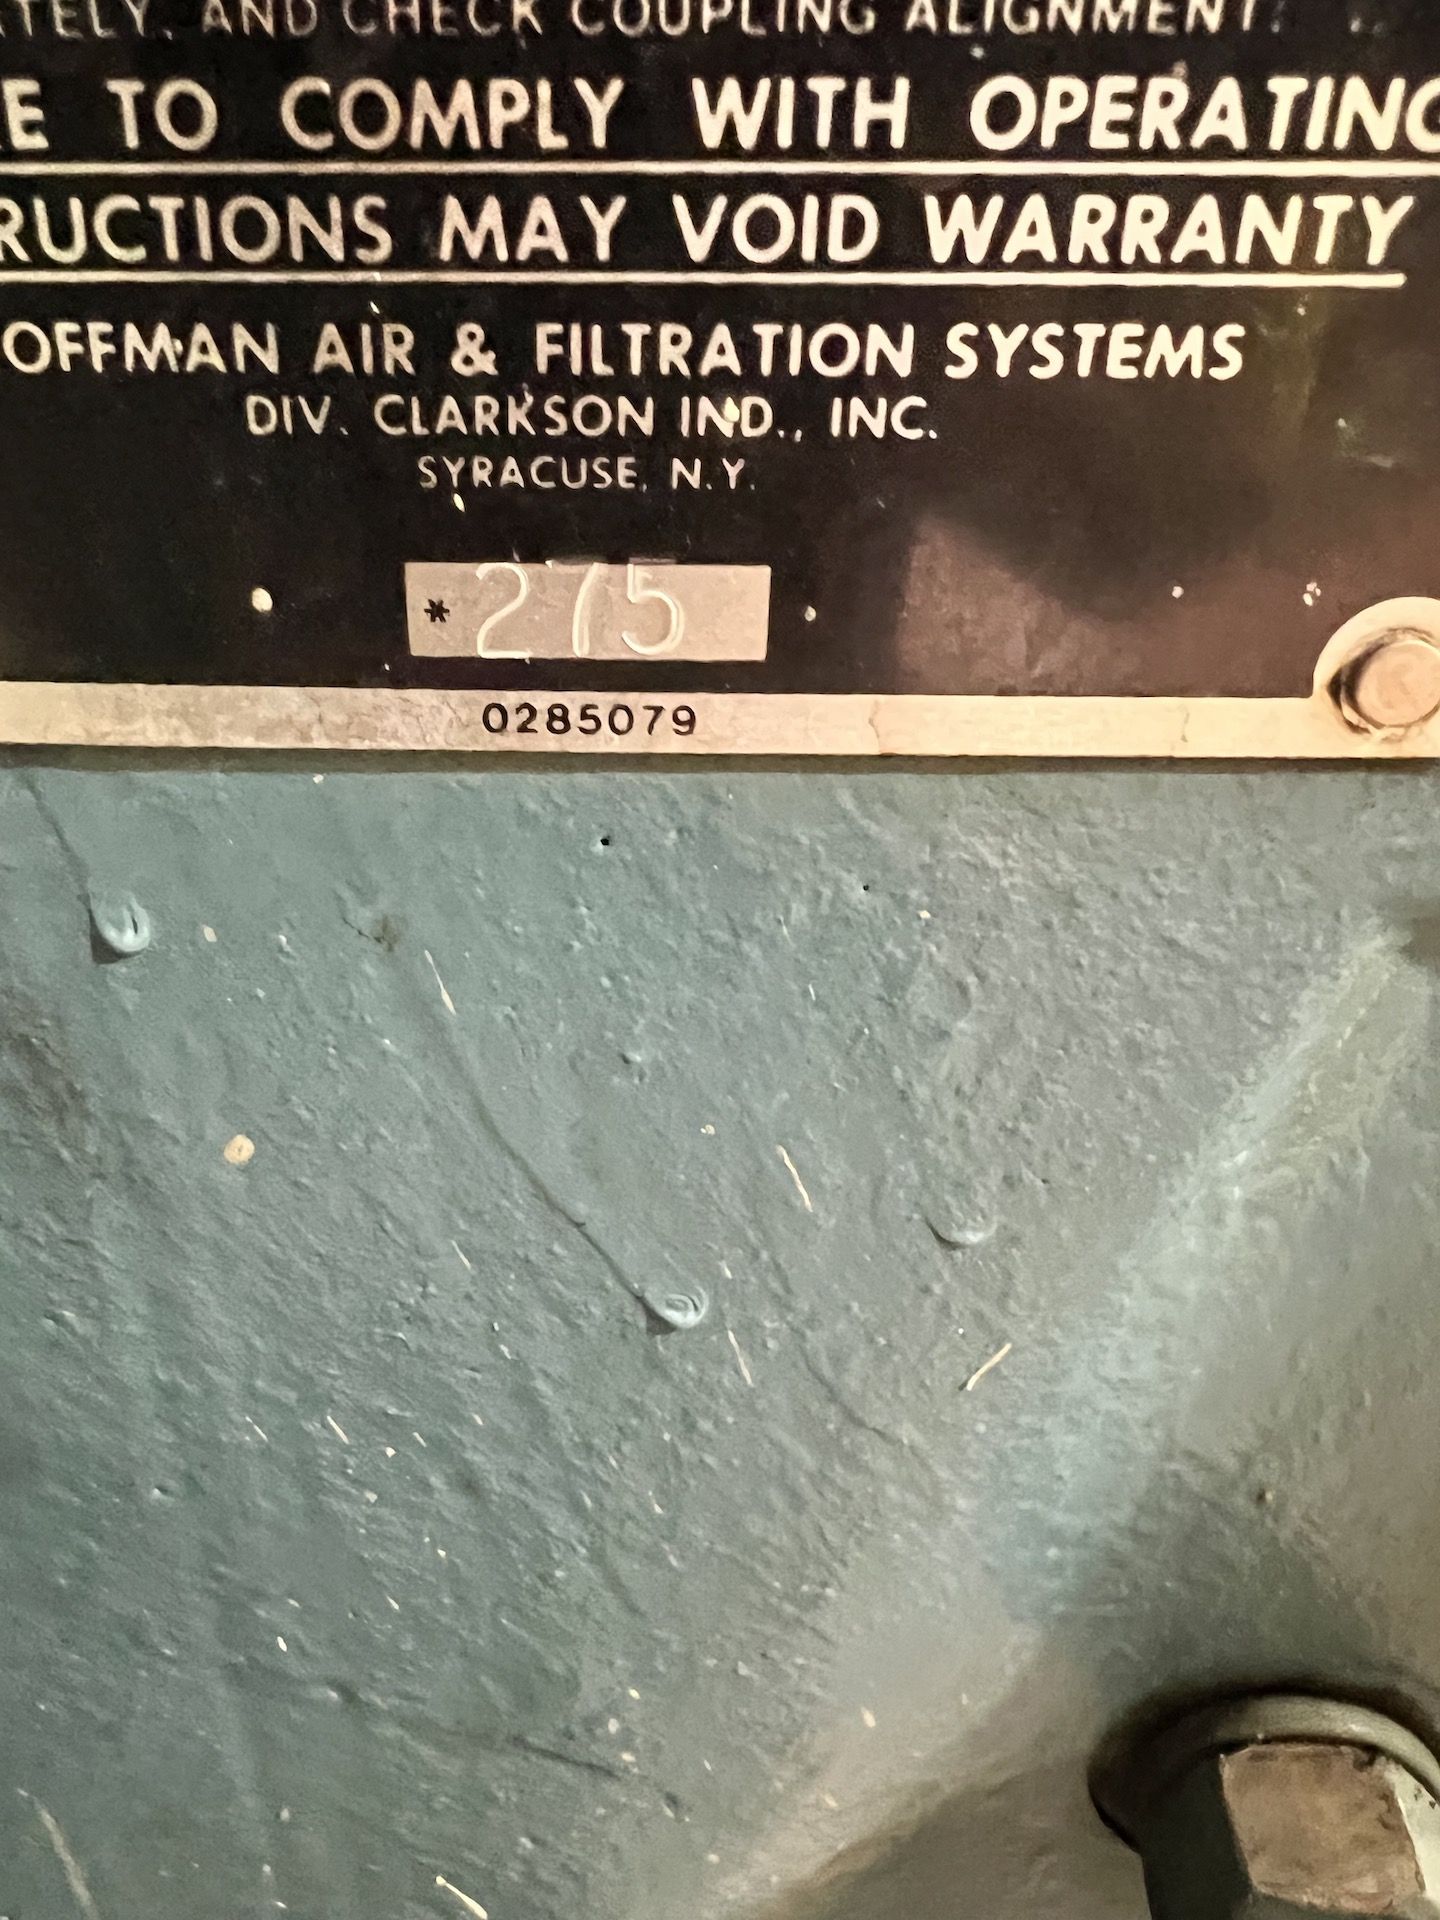 HOFFMAN CENTRIFUGAL EXHAUSTER / BLOWER, MODEL 38308E, S/N M105950, 50-HP, 3535 RPM, 230/460 V - Image 12 of 15